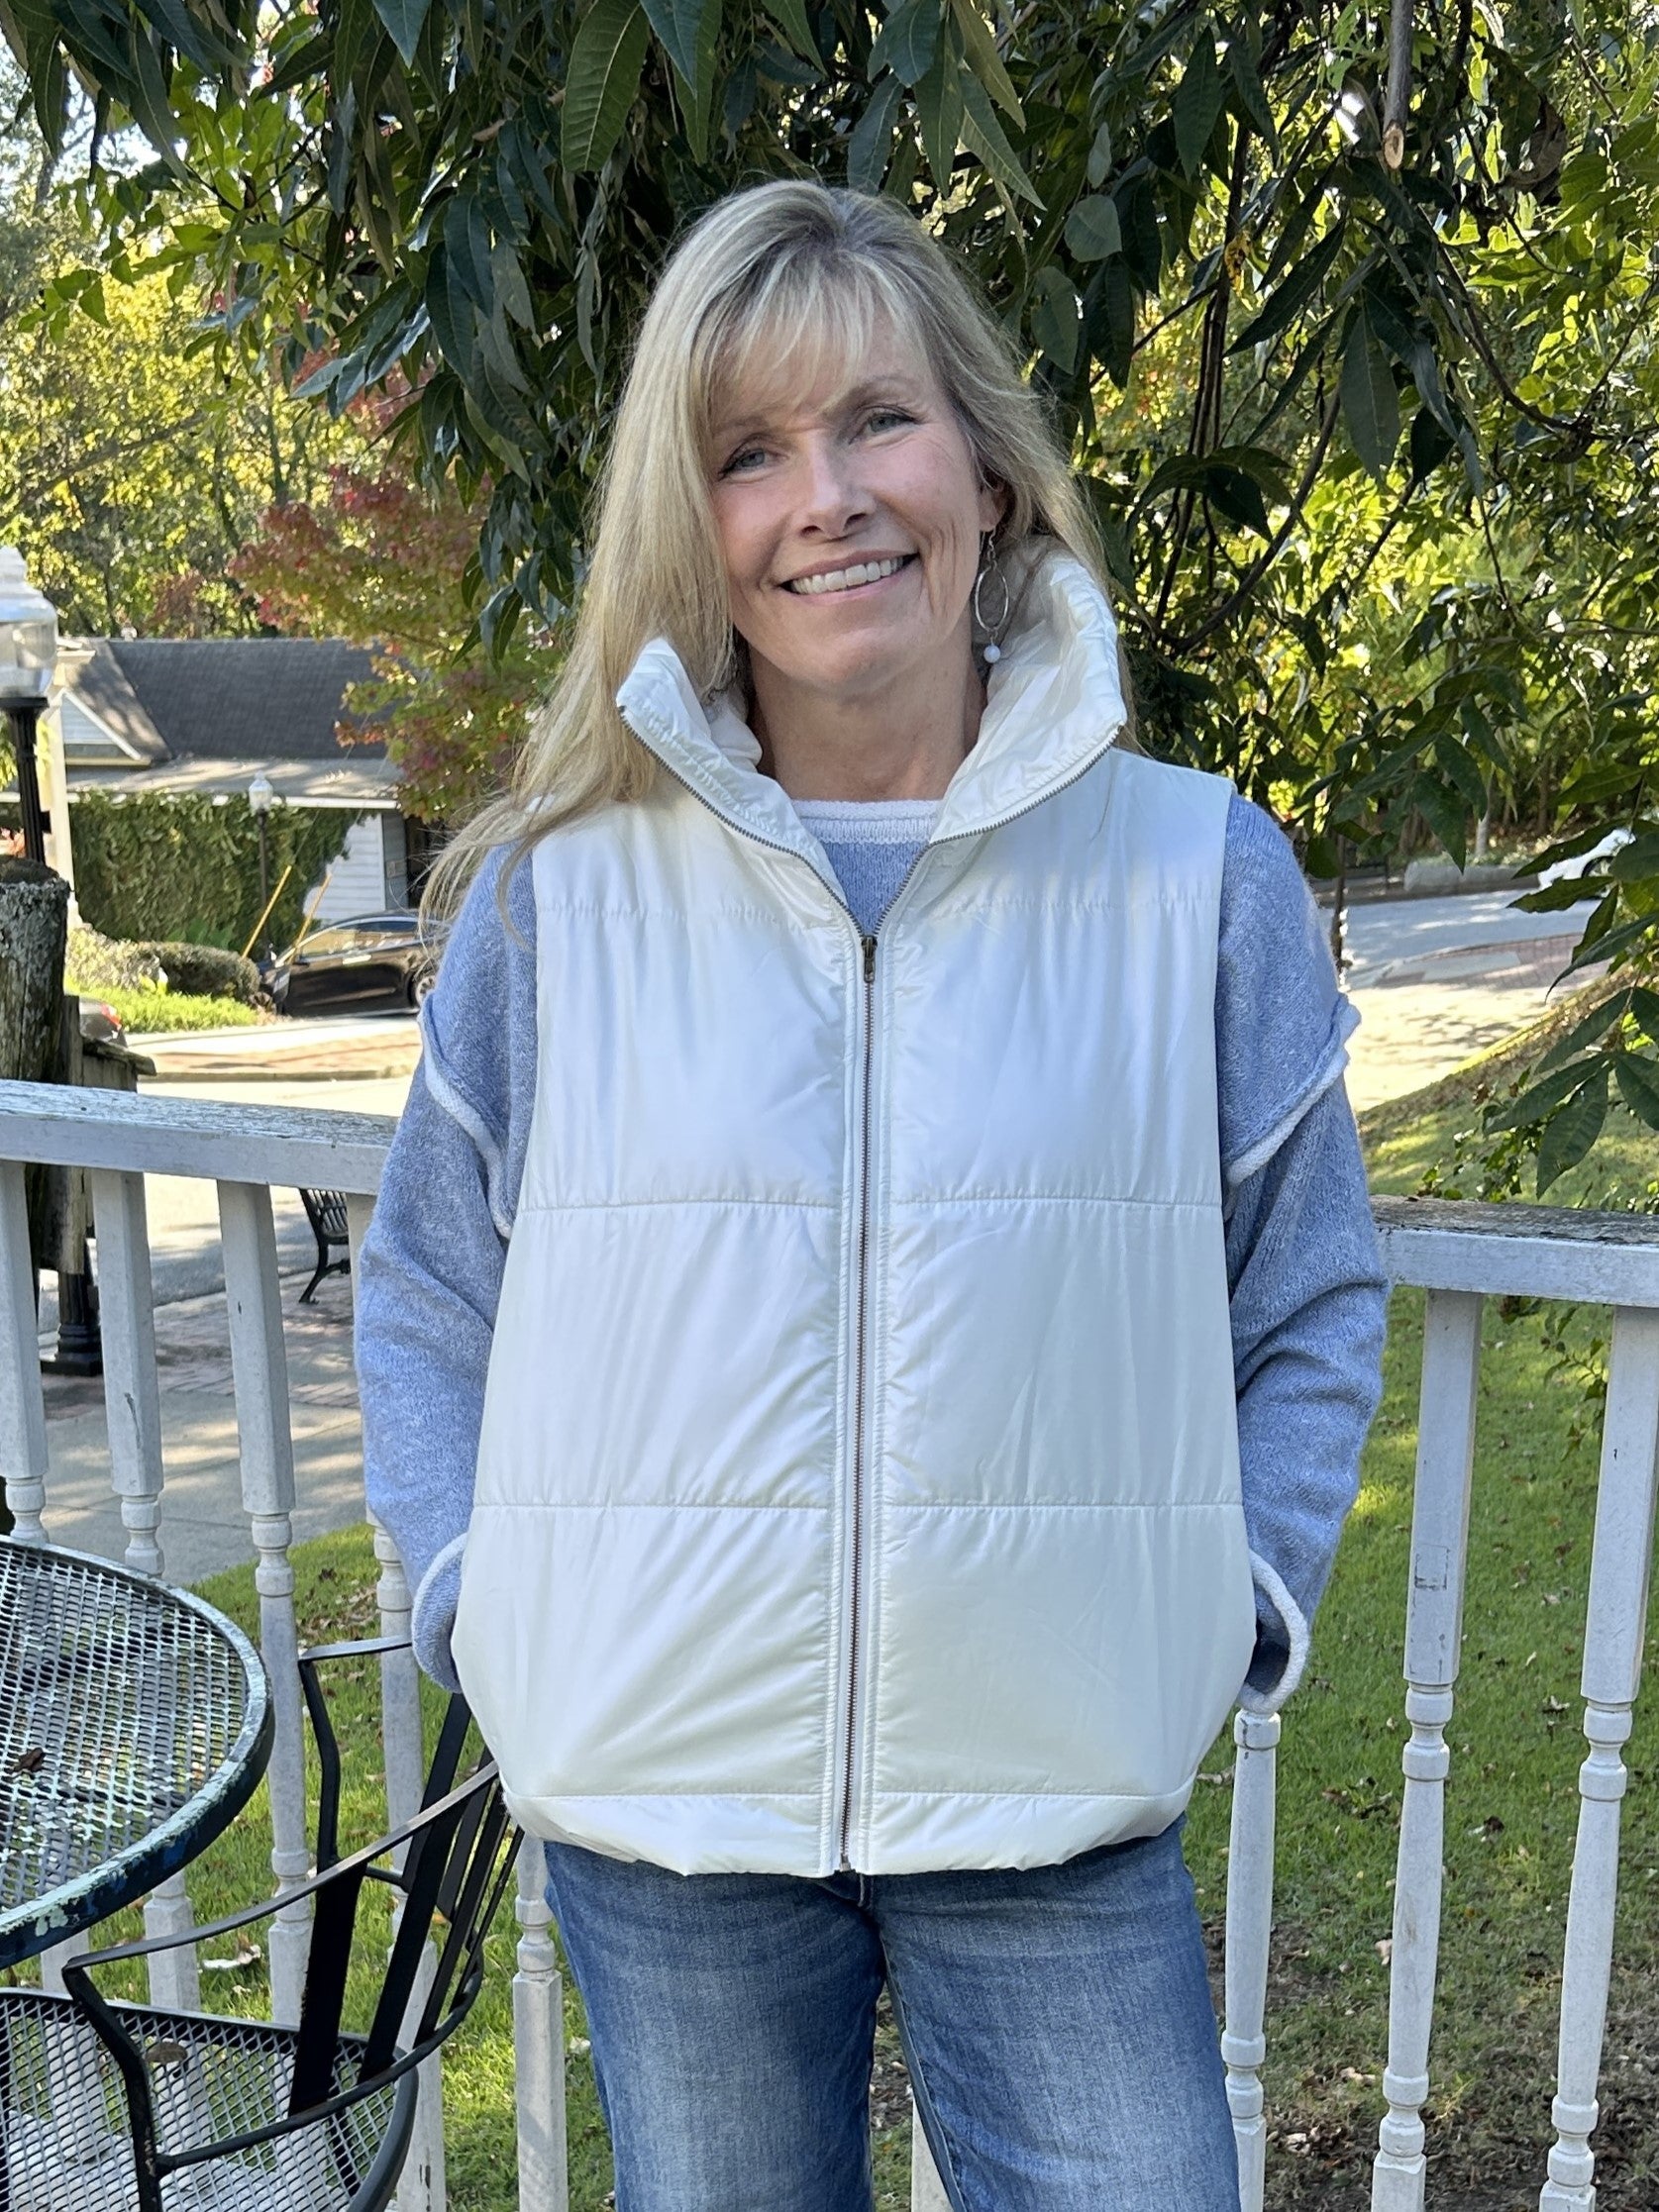 Stay warm and look stylish in this Ivory Puffer Vest! This beautiful cream-colored vest has a sheen, front zip closure, convenient side pockets, and a fold-over or stand-up collar. Up your fashion game with this cozy and versatile piece.   Material: 100% Polyester; Lining 100% Polyester  Care Instructions: Hand wash cold, 